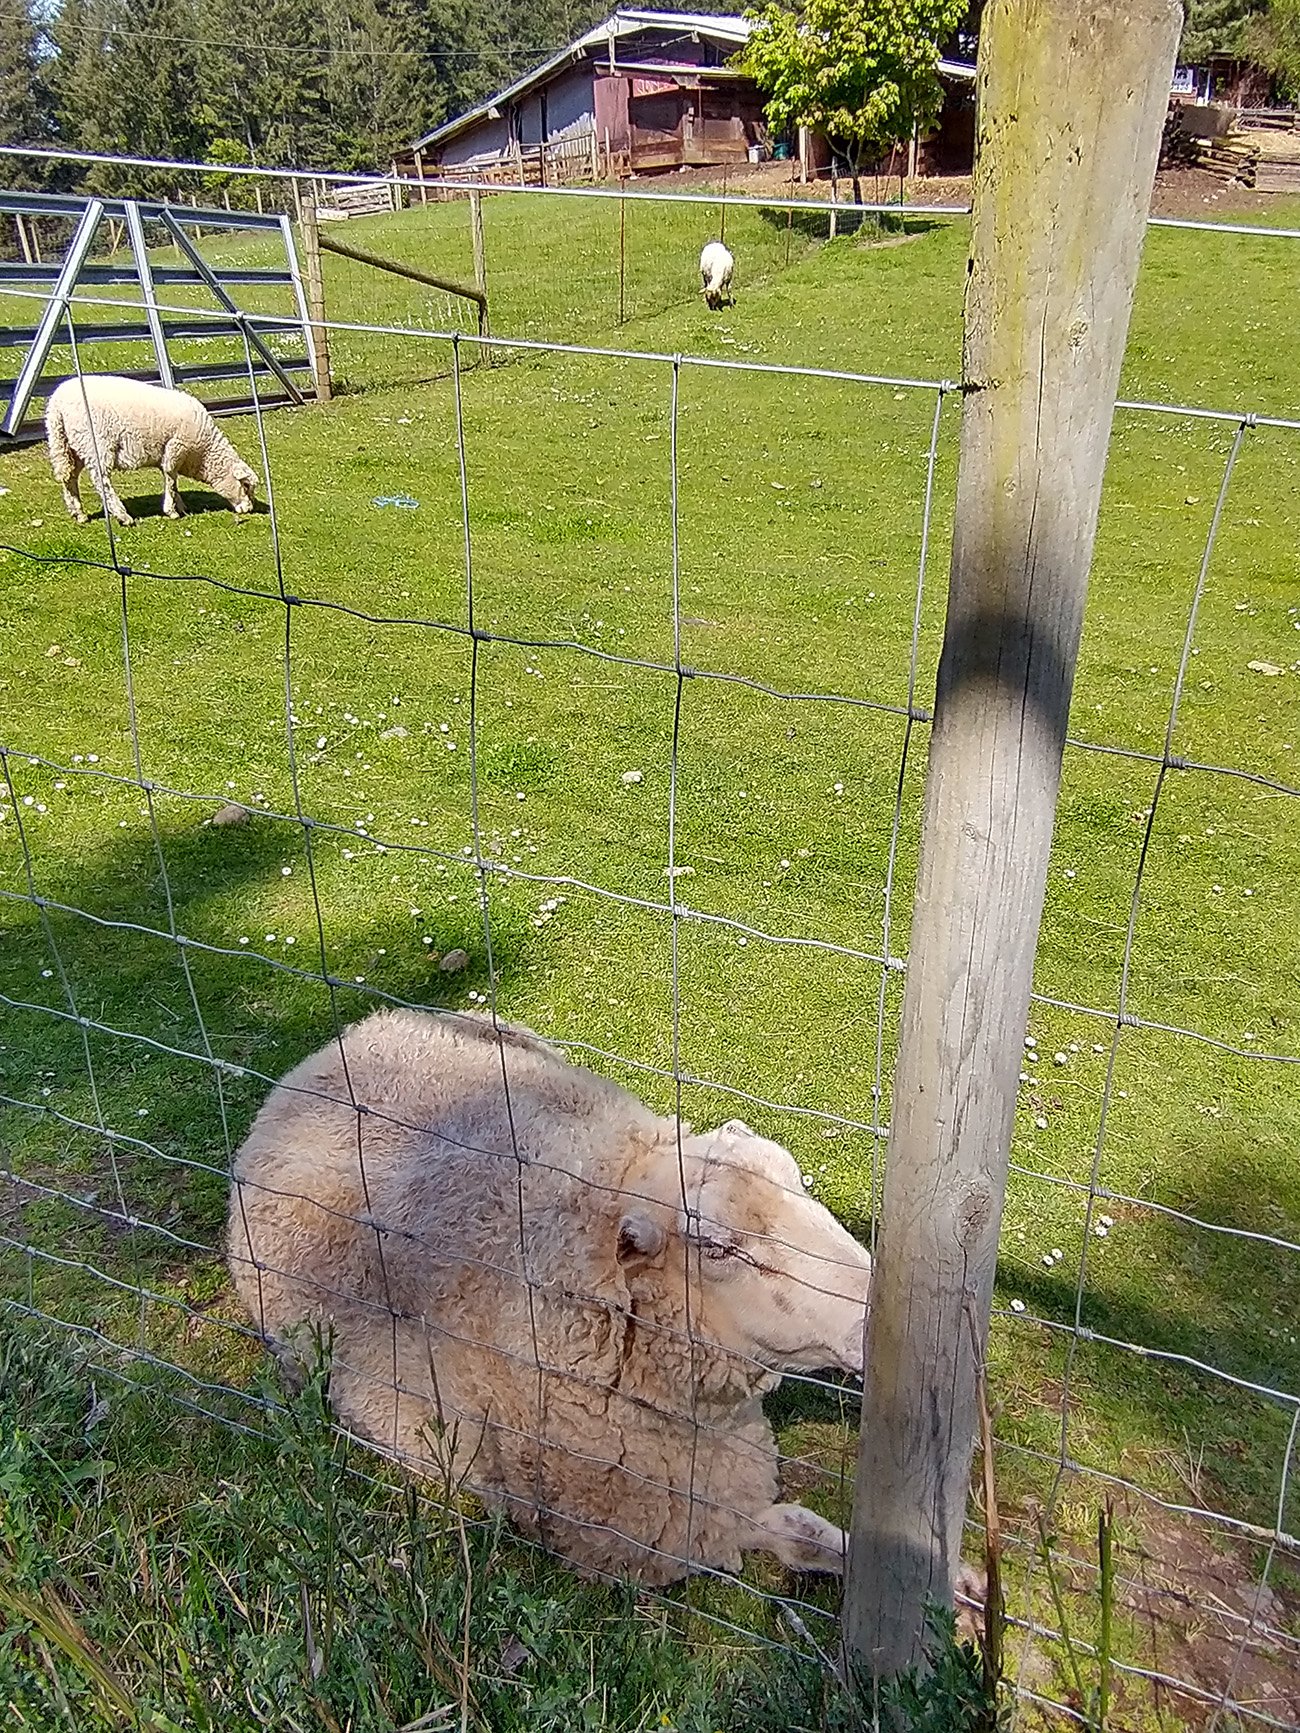 Sheep yearning for freedom. Probably.